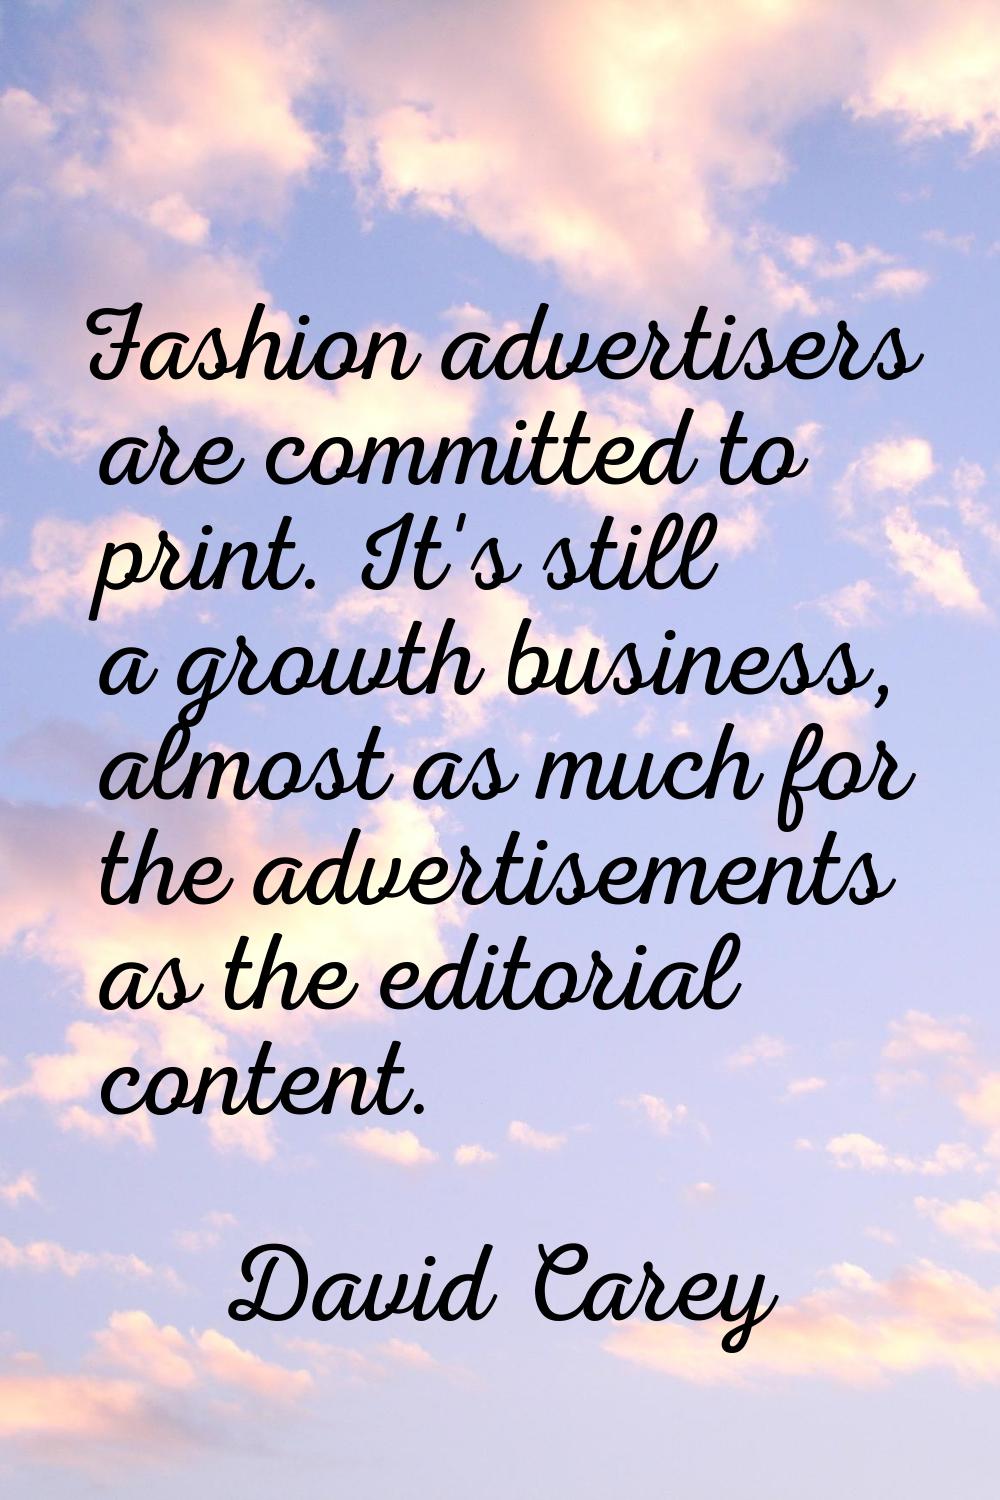 Fashion advertisers are committed to print. It's still a growth business, almost as much for the ad